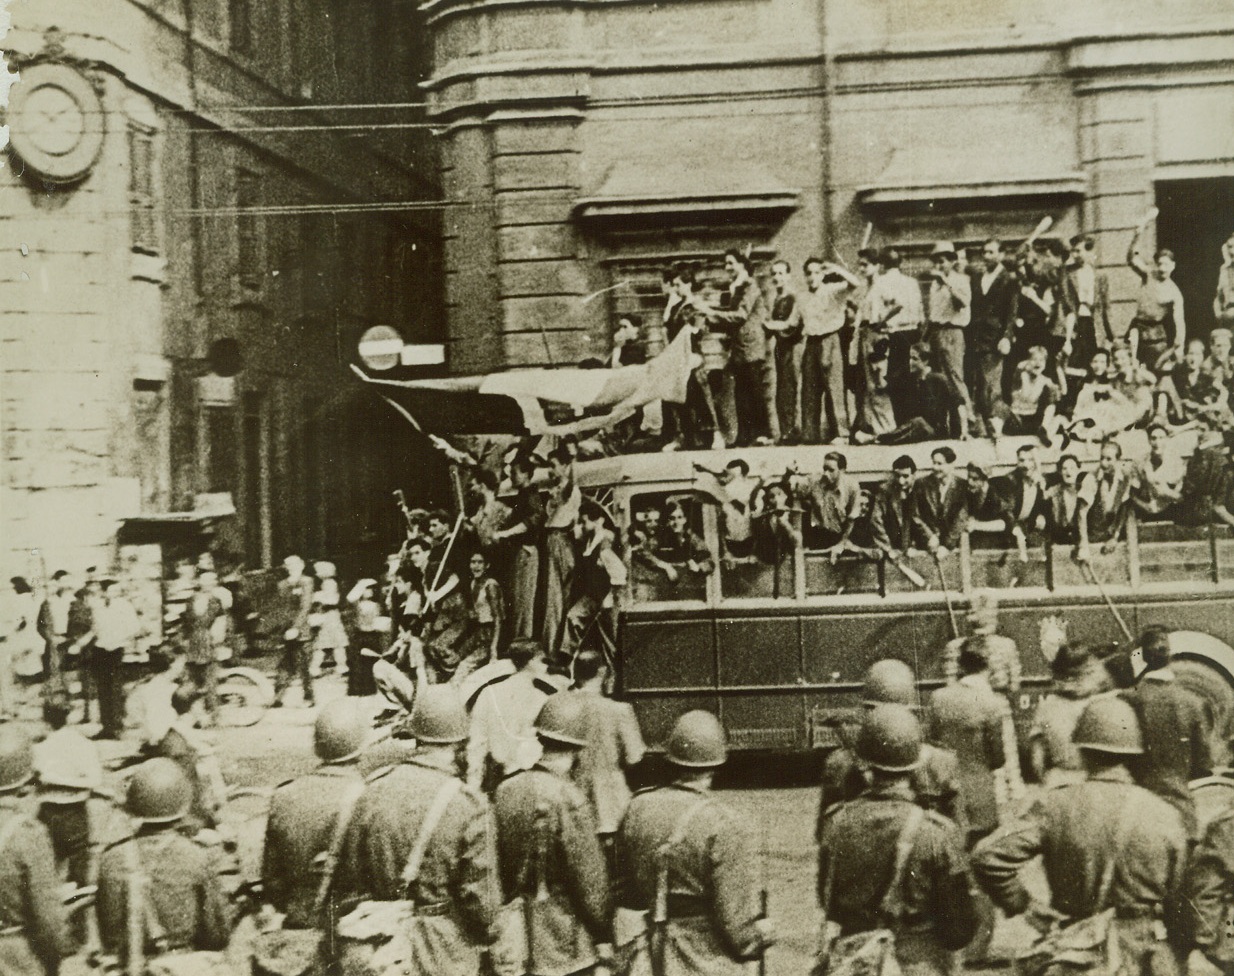 Glad to Be Rid of Benito, 9/17/1943. ROME—Turning out into the streets of Rome to shout their approval of the ousting of Benito Mussolini, these happy Italians jam a bus and climb to the roof of the vehicle to celebrate. Italian soldiers look on as the liberated Italians demonstrate. This photo if from an Italian newsreel, obtained through a neutral source. Credit: ACME.;